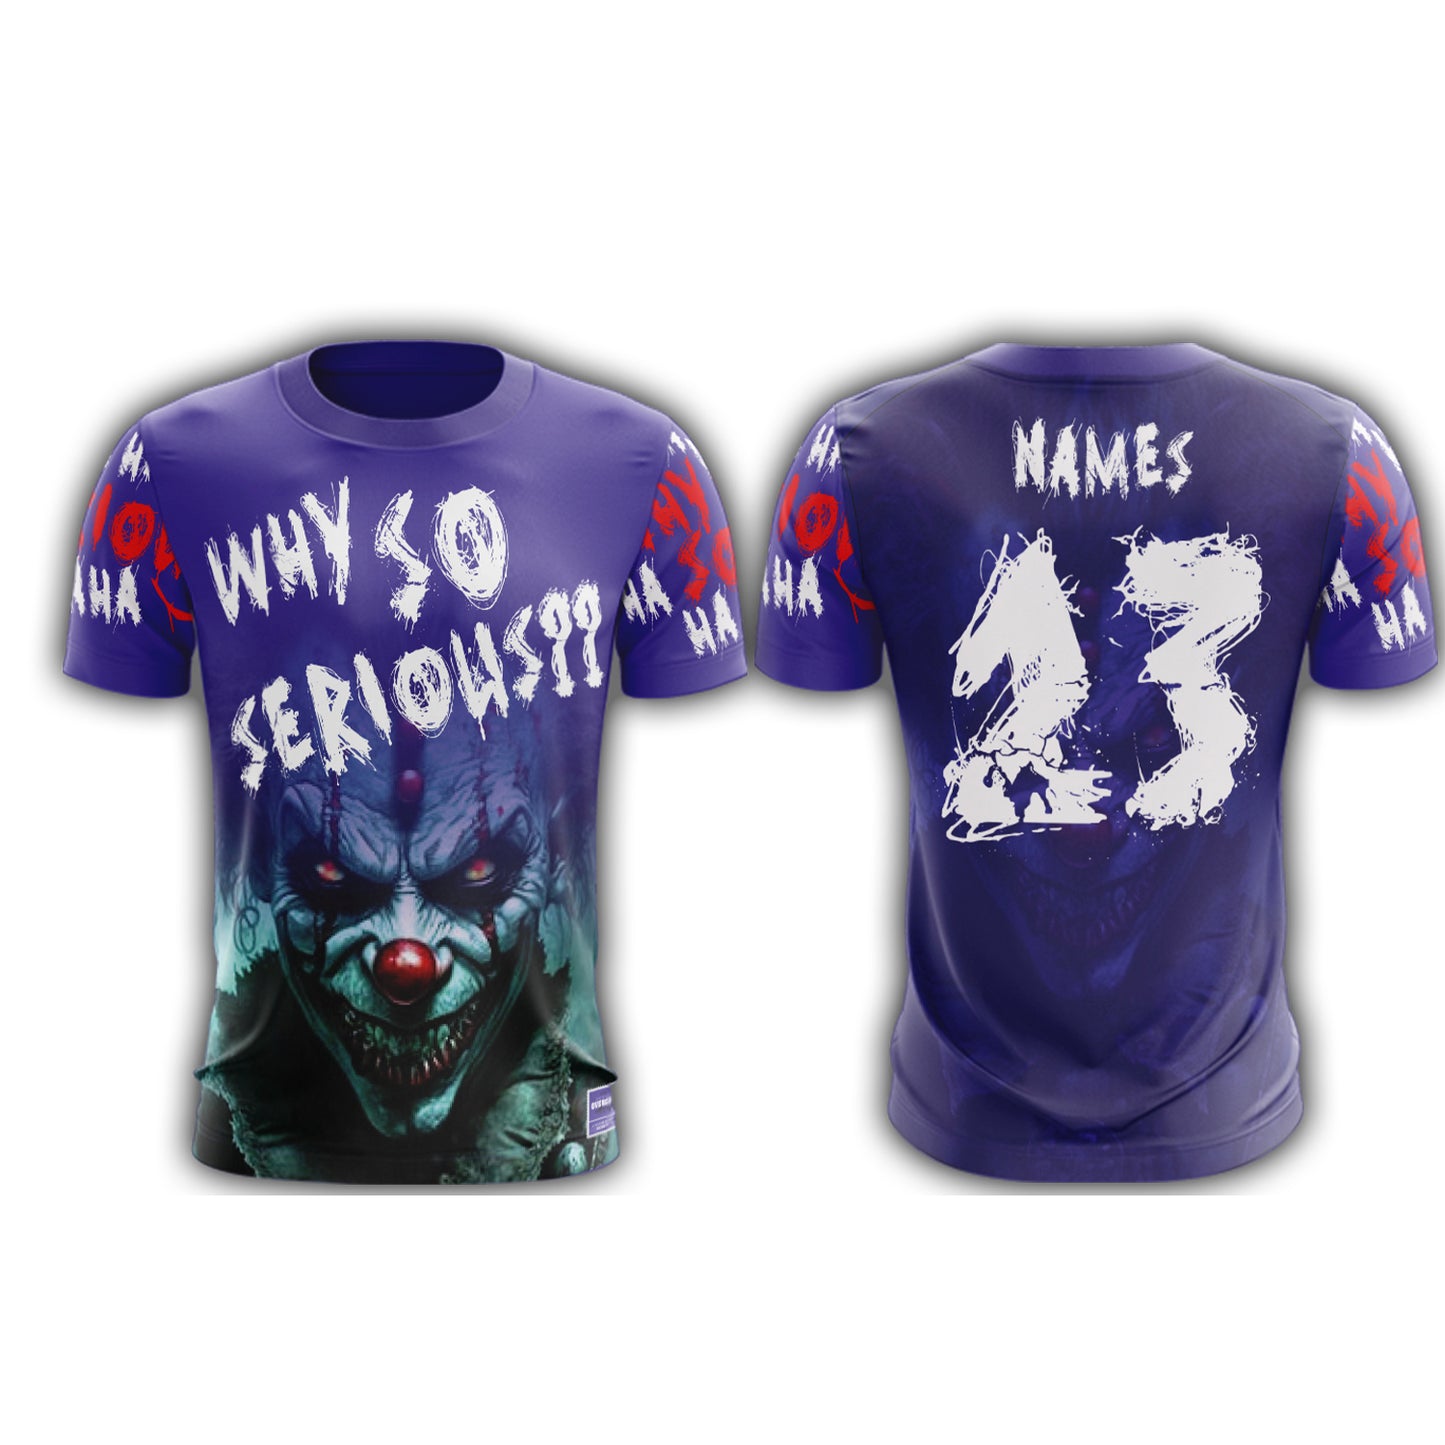 Why So Serious - Purple - Short Sleeve Shirt (Customized Buy-In)